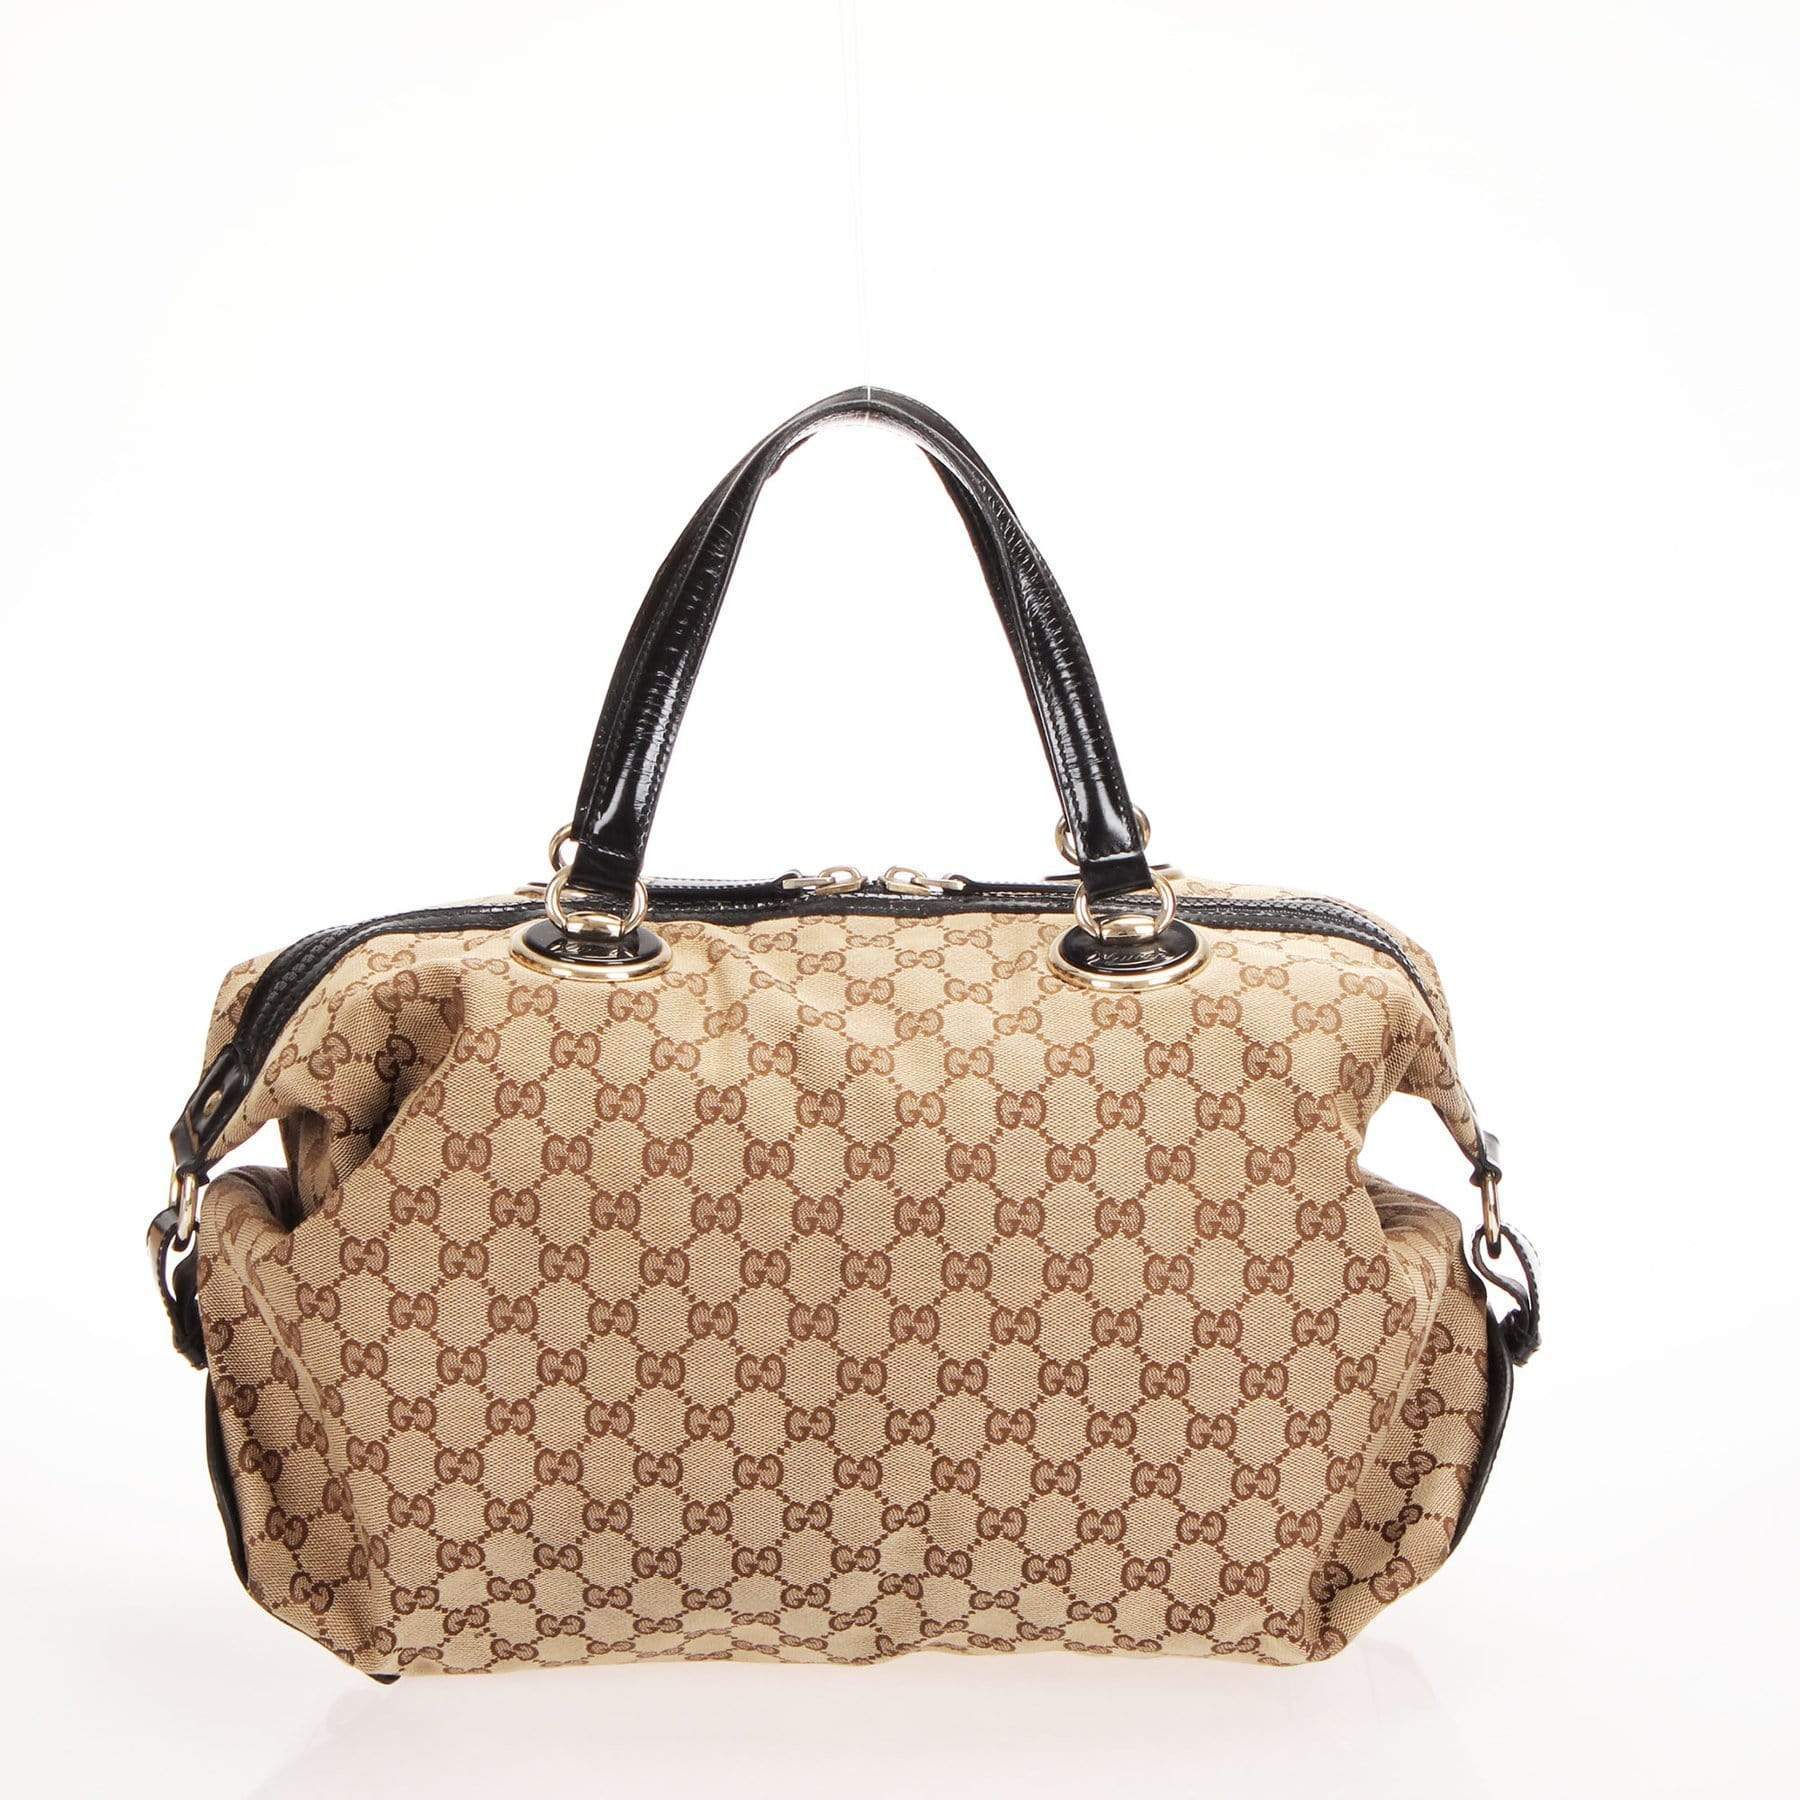 Gucci Beige/Black GG Canvas and Patent Leather Medium Full Moon